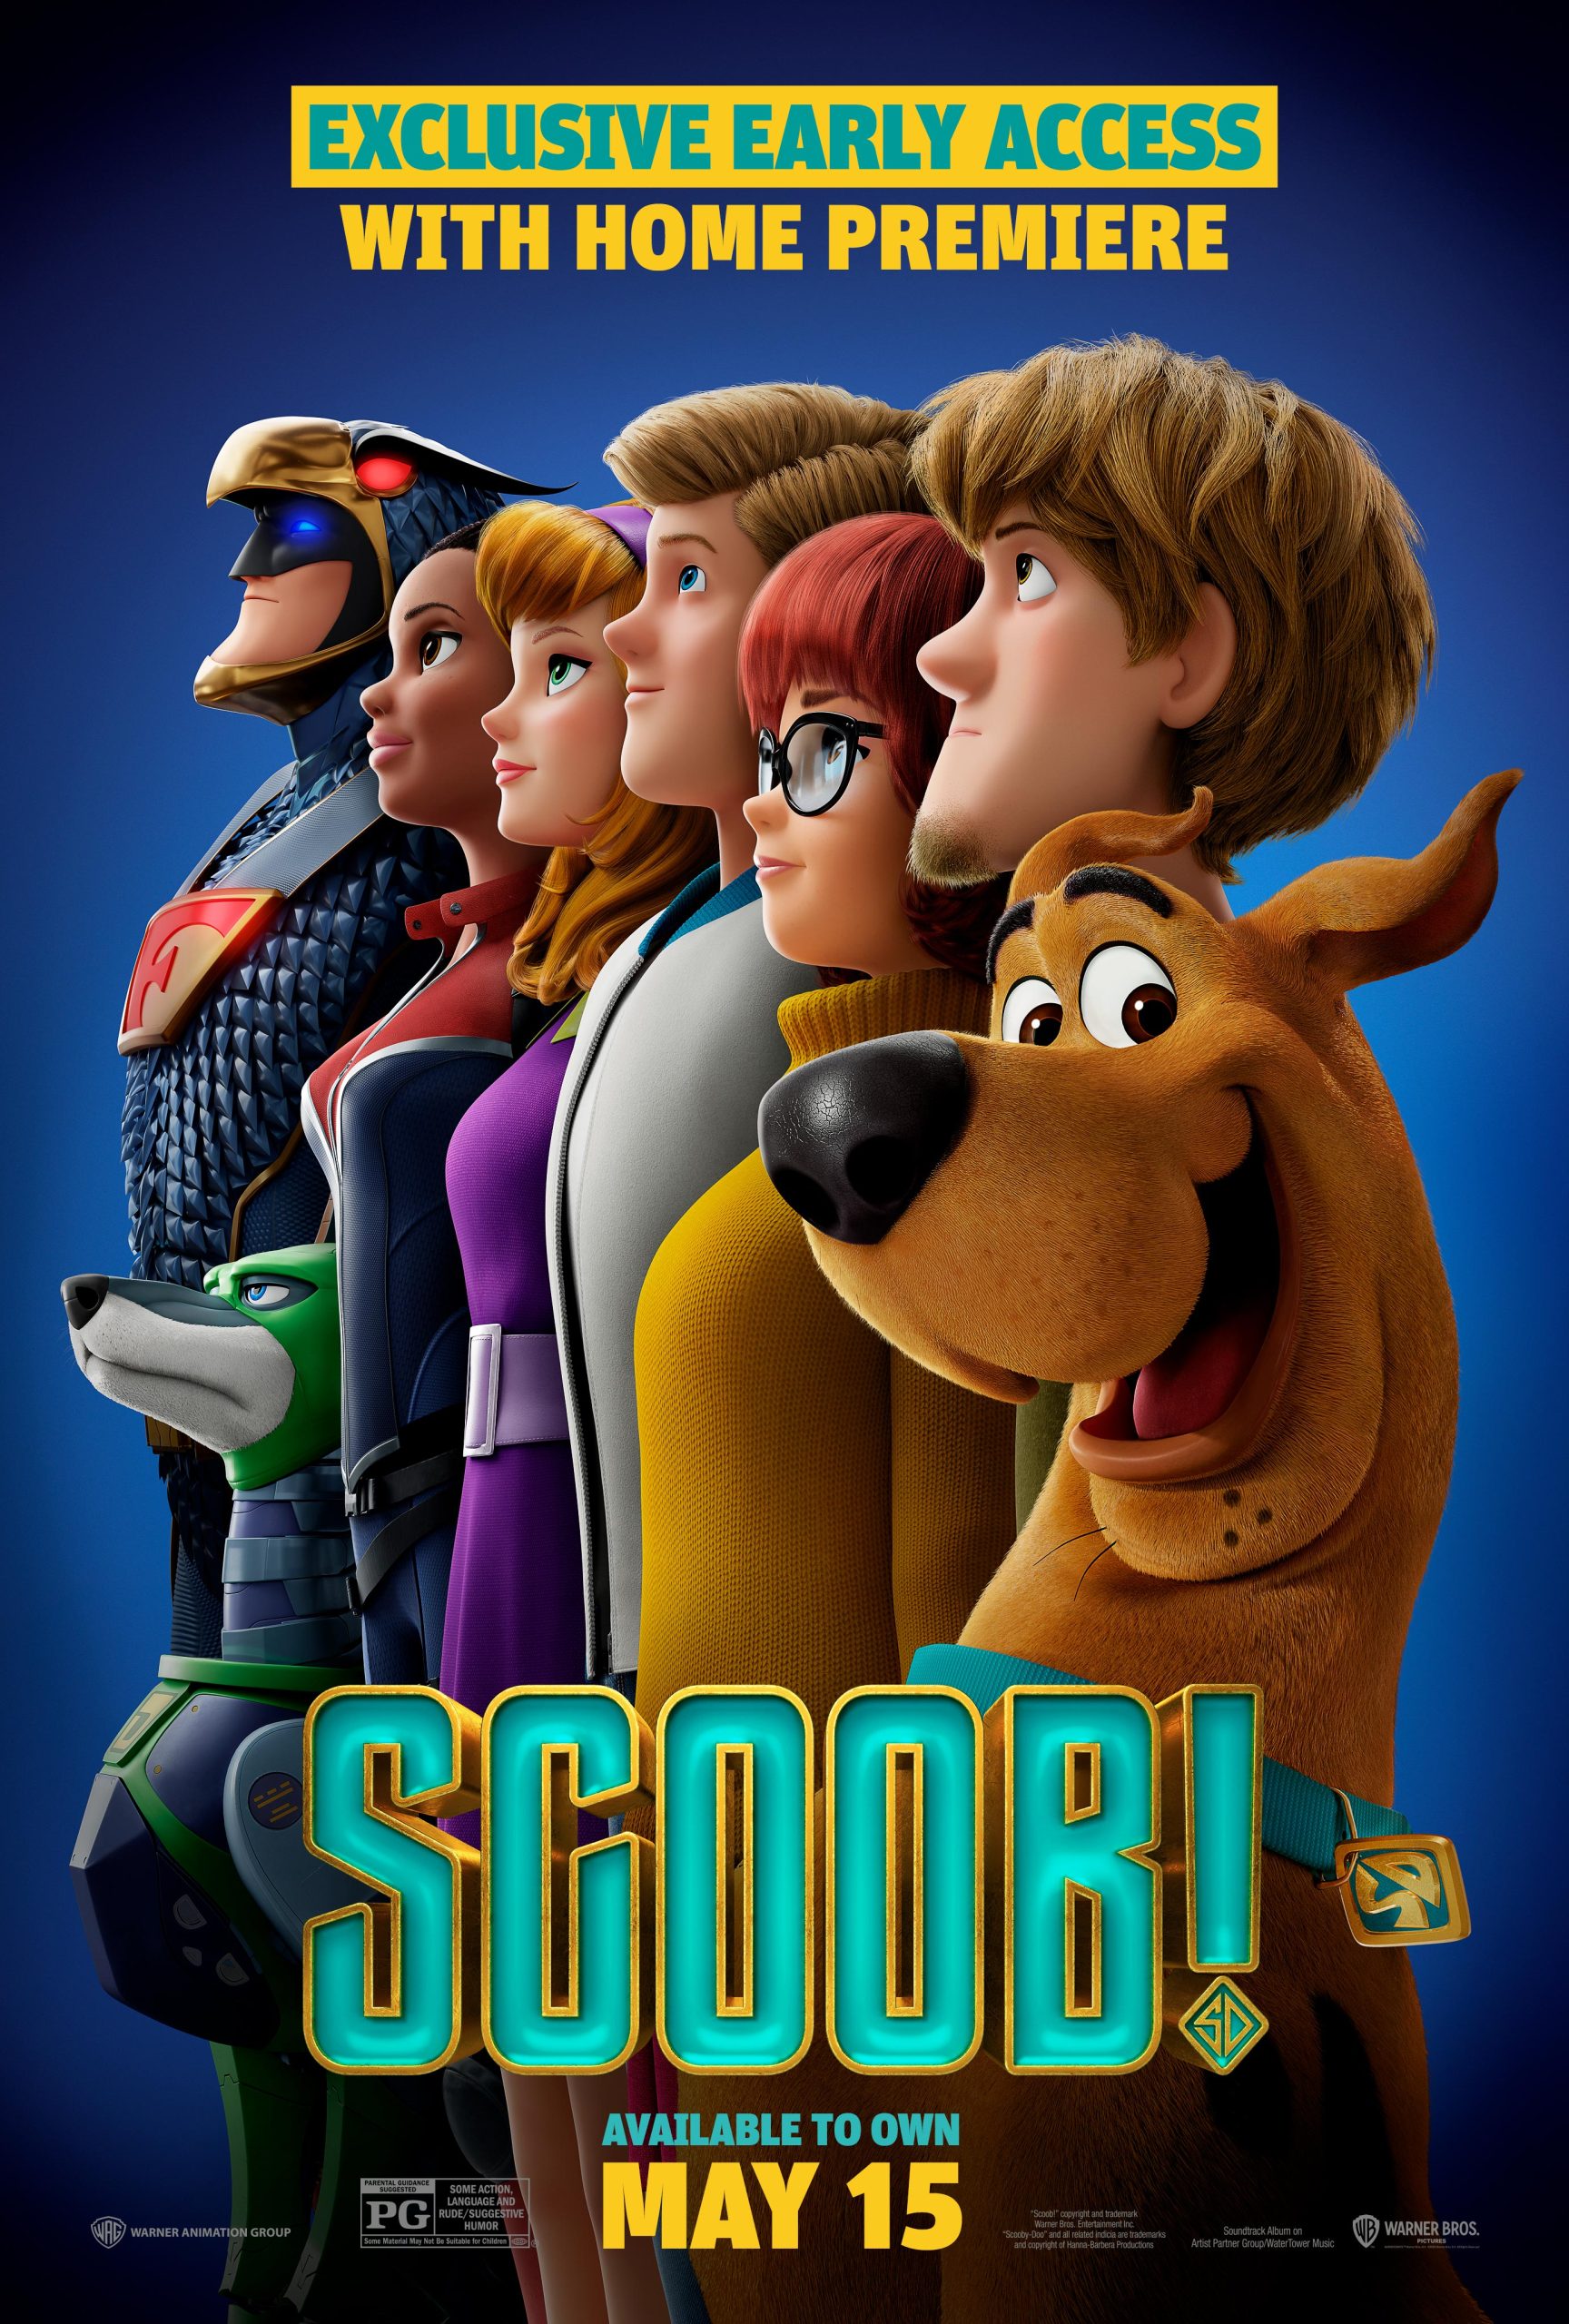 You’re Invited to the Home Premier of SCOOB! – May 15th #Giveaway